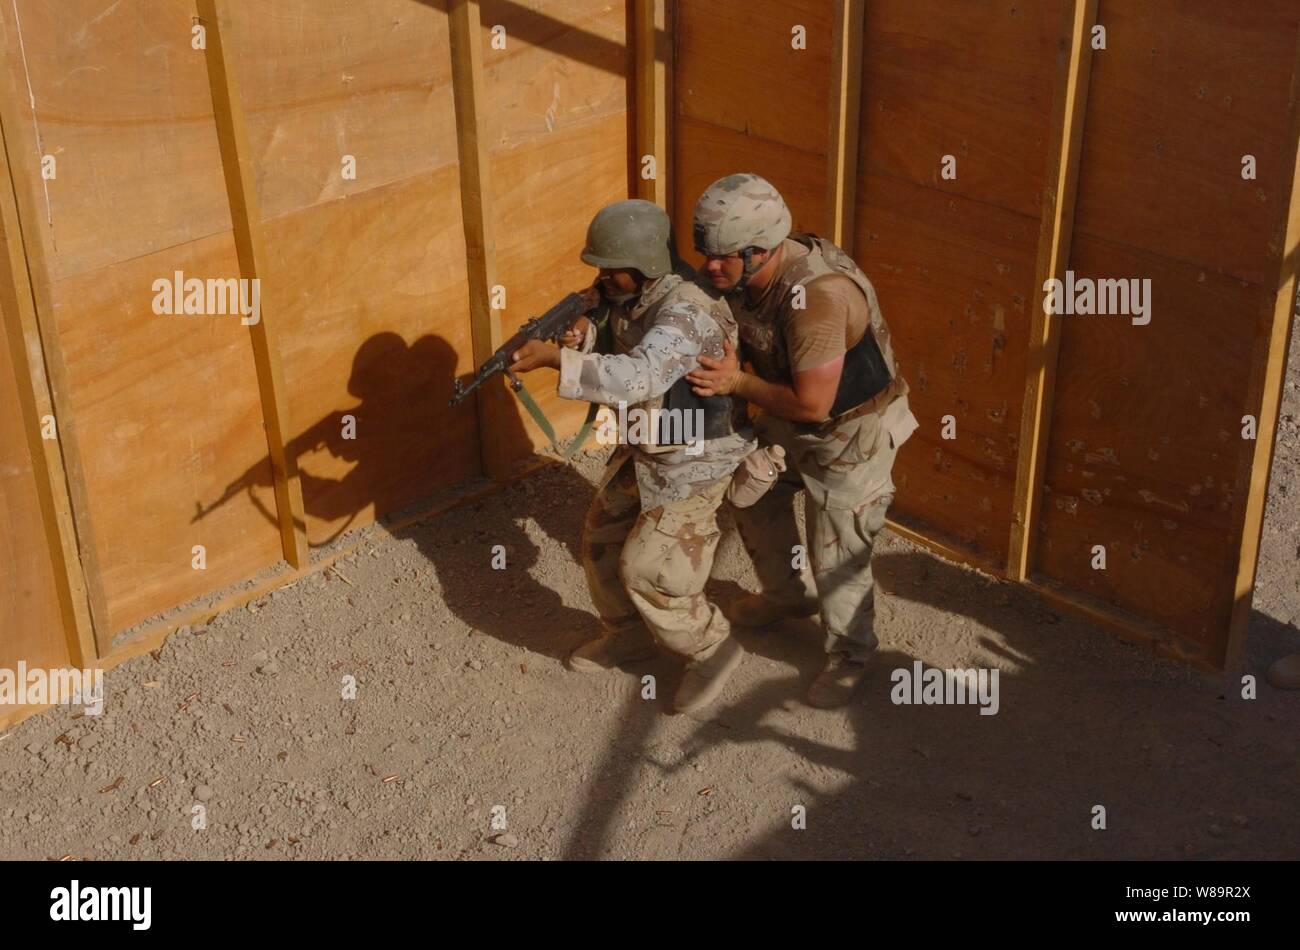 A U.S. Army soldier guides an 8th Division Iraqi Army soldier as he participates in a Shoot House live fire weapons training exercise at the Iraqi Army Compound on  Forward Operating Base Iskandariyah, Iraq, on July 30, 2005.  Members of the U.S. Army Multinational Training Team, part of the 155th Brigade Combat Team, are training Iraqi Army soldiers to increase their proficiency. Stock Photo